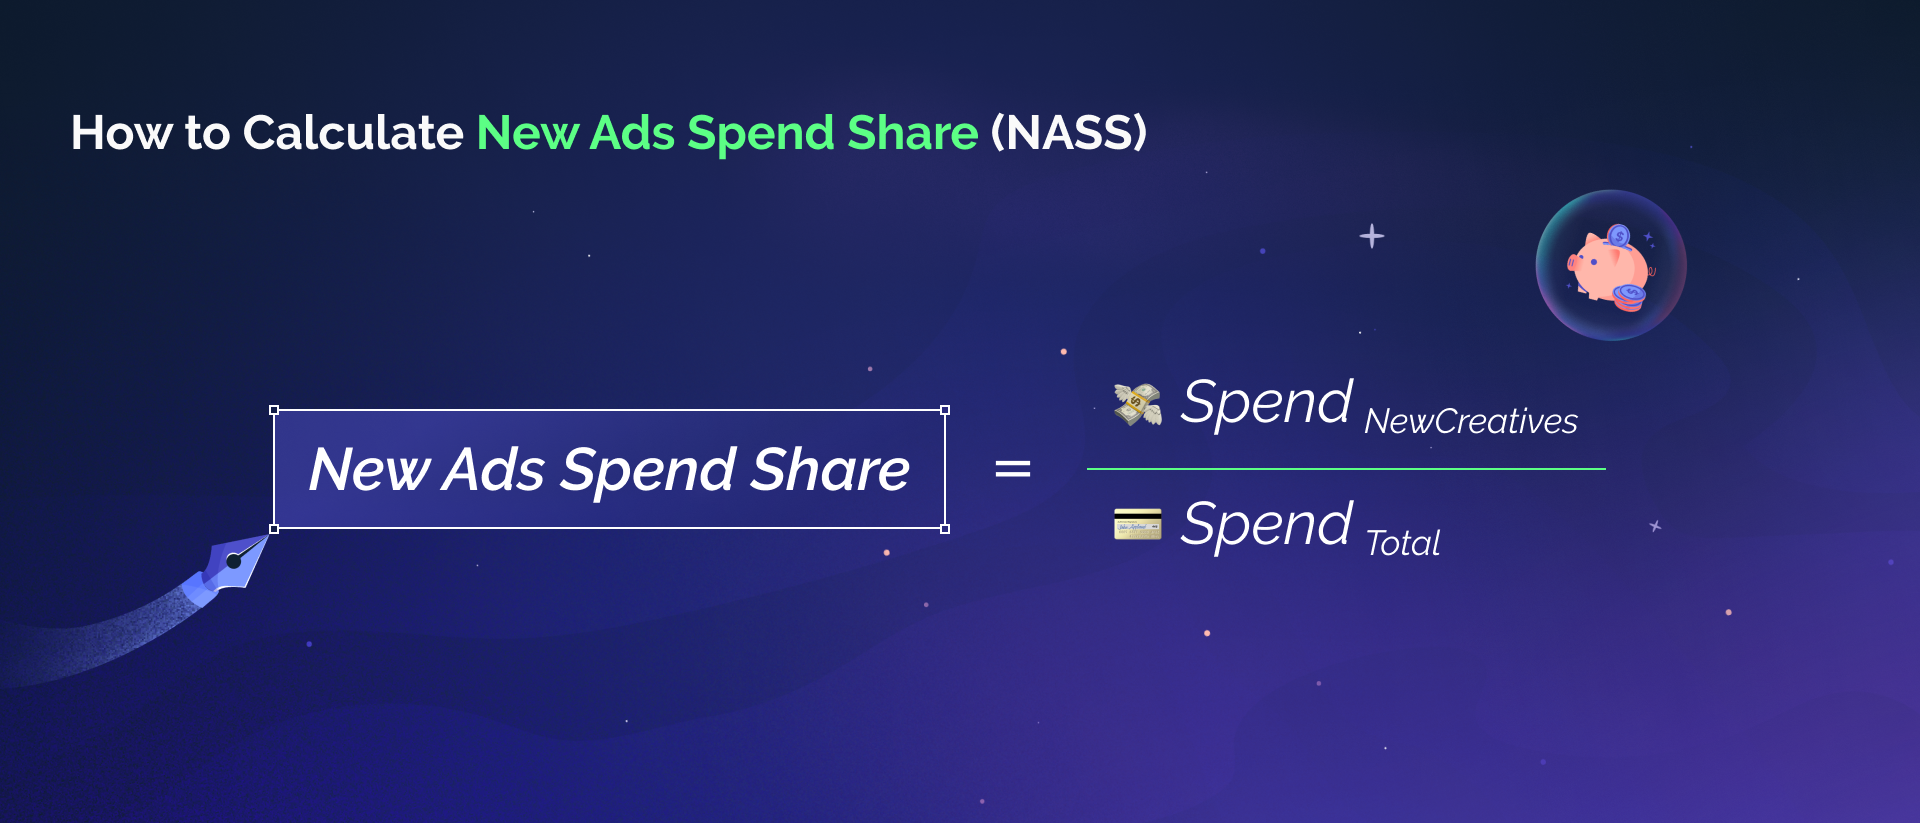 How to Calculate New Ads Spend Share (NASS)